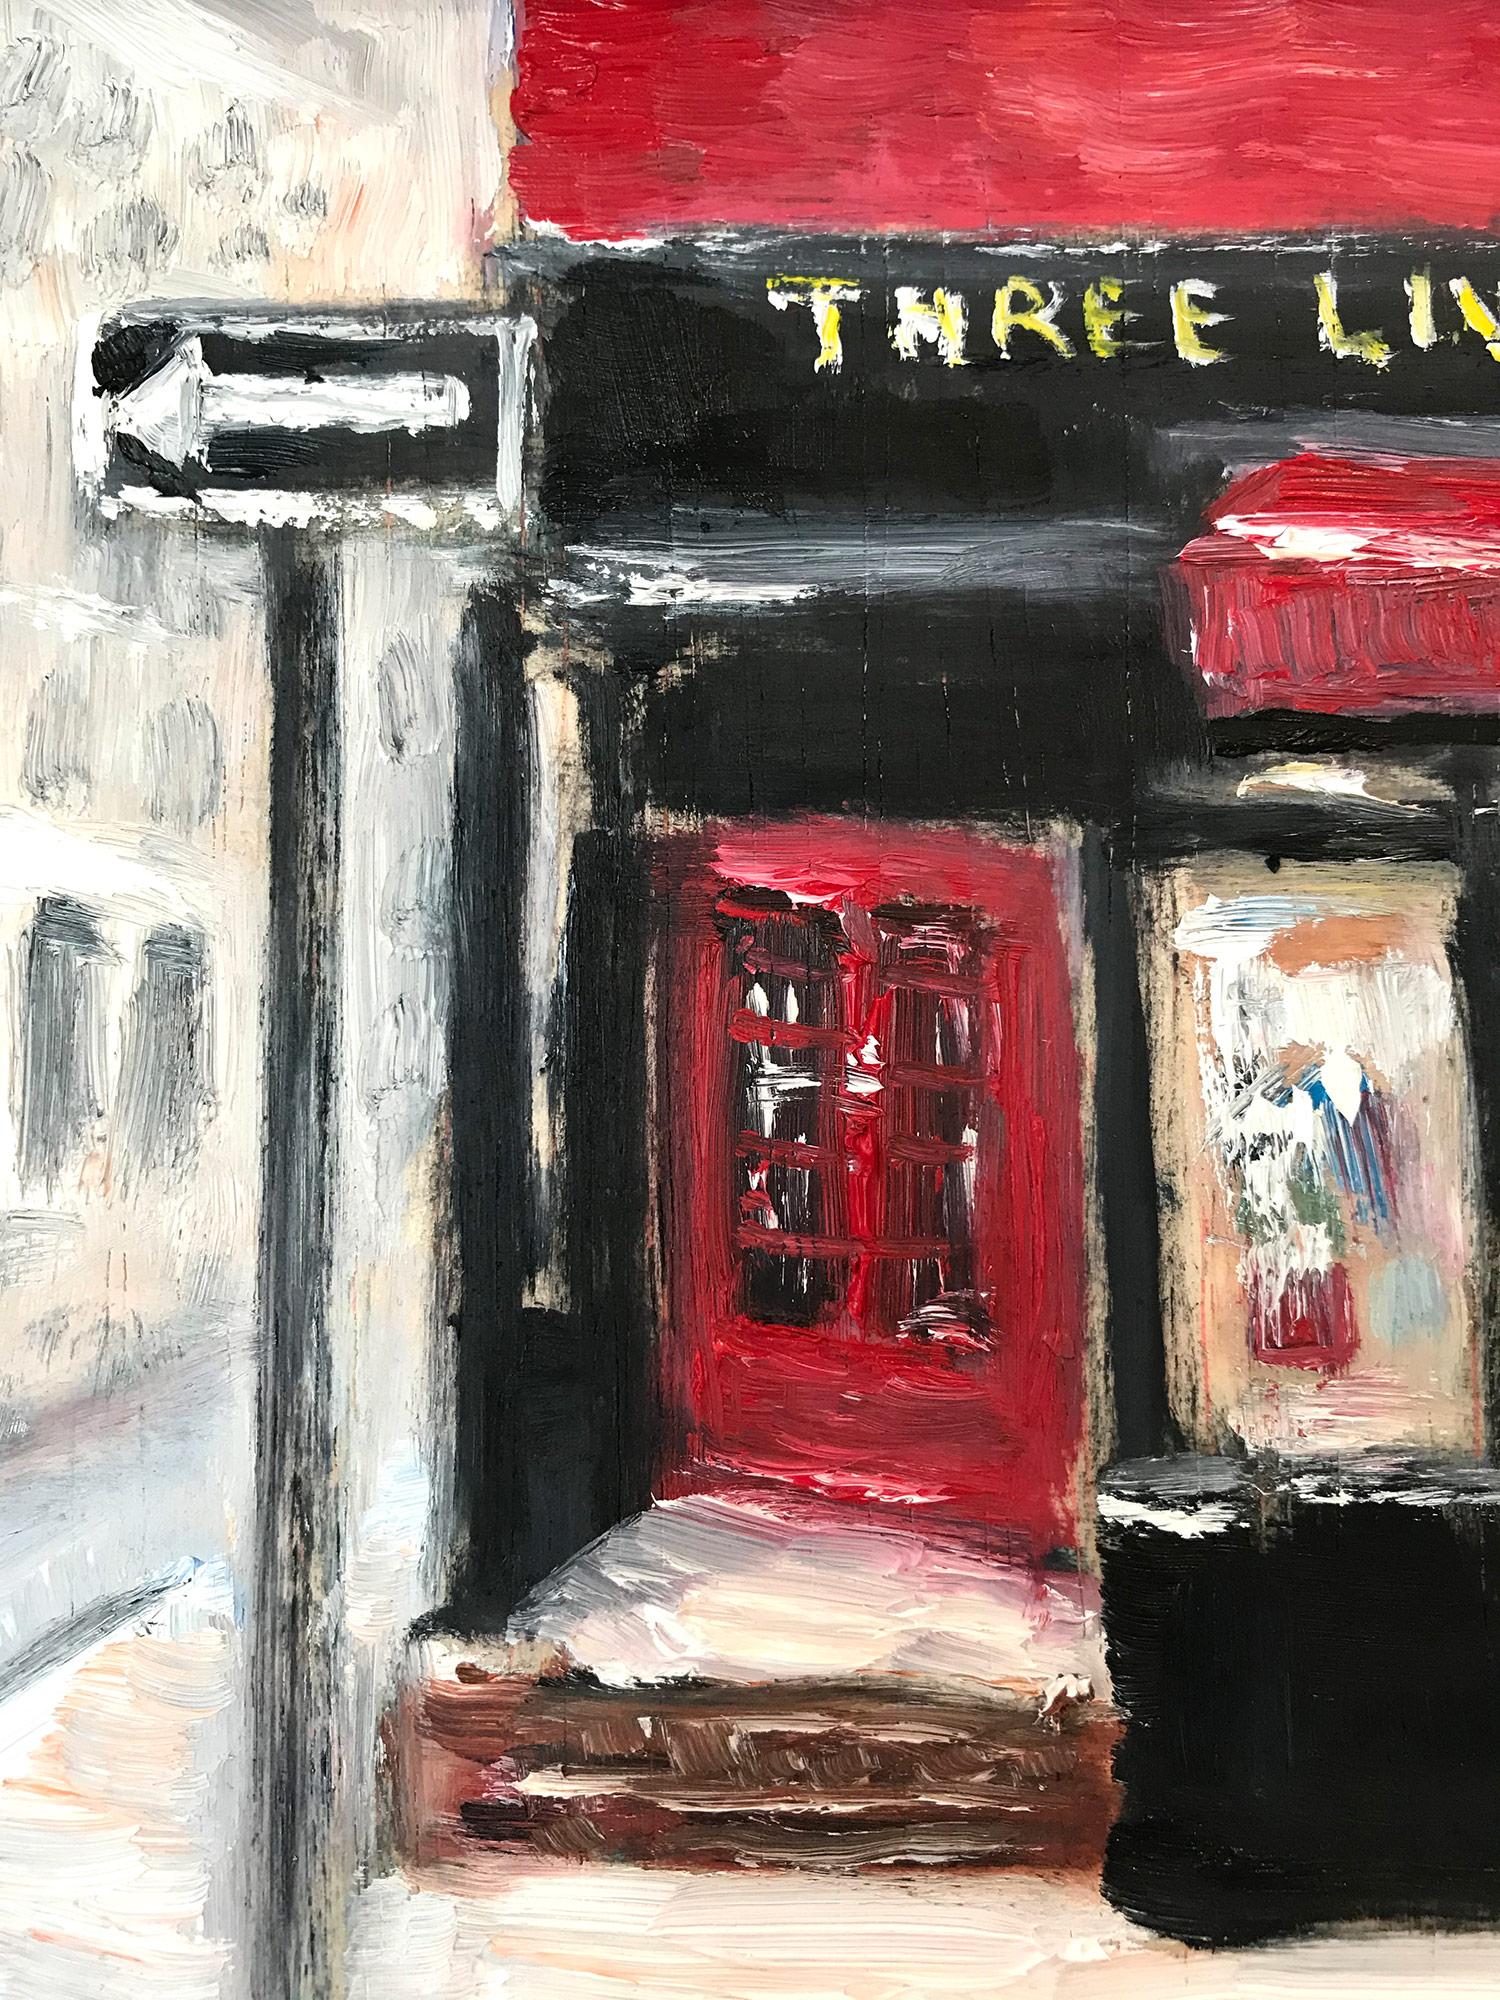 A charming depiction of Three Lives & Co Book Shop. A cozy impressionistic scene with warmth and feeling. A whimiscal scene with stunning details and beautiful brushwork. A Plein Air painting, this piece captures the essence of a Greenwhich living,